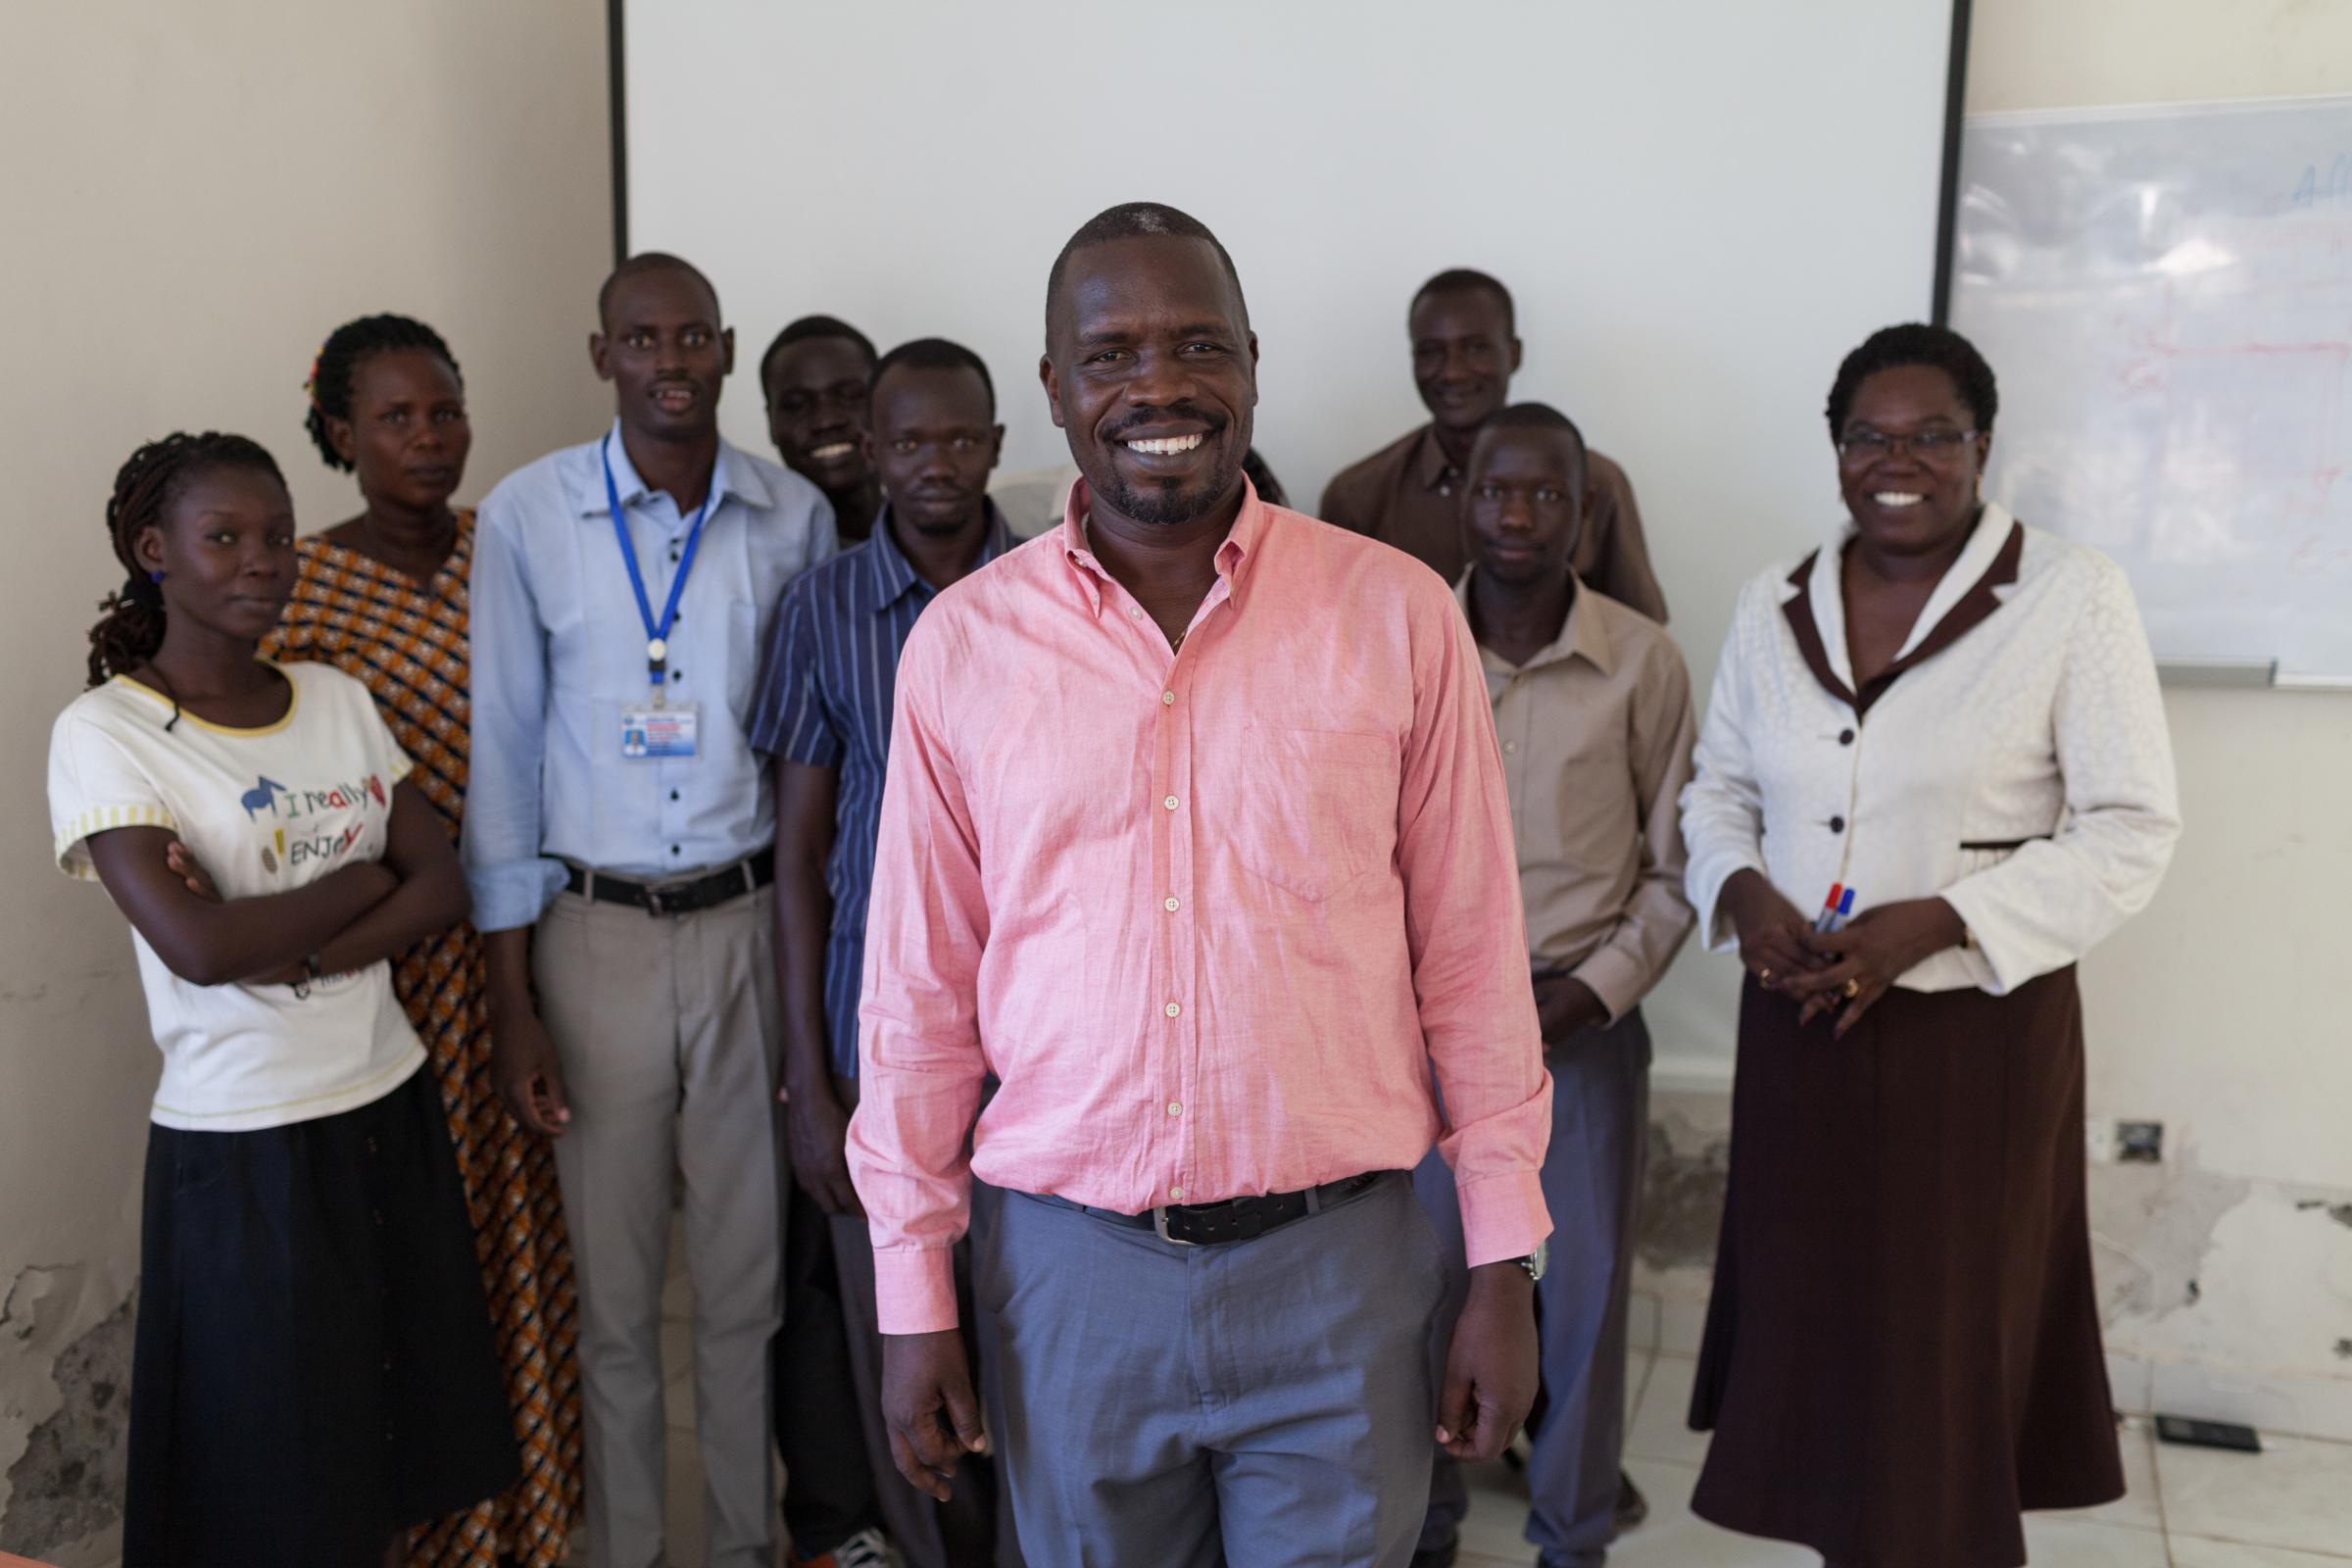 MIDWIVES: BRINGING HEALTH SERVICES CLOSER TO THE PEOPLE - The Dean of the Juba College of Physicians and Surgeons, Dr. Frederik Khamis among students at...